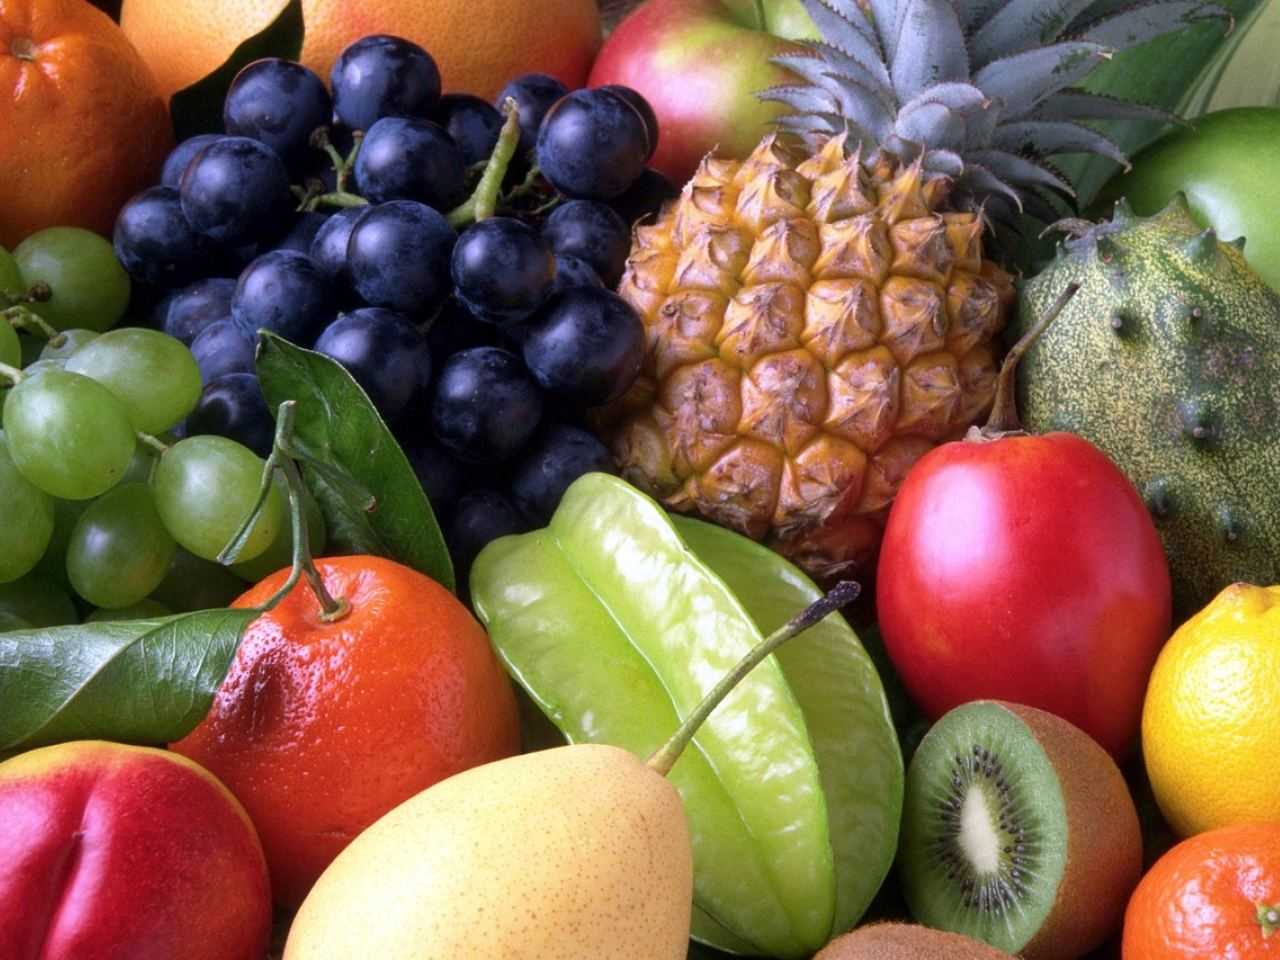 Stop the ripening process and prevent spoilage: What fruit is best kept in the refrigerator?